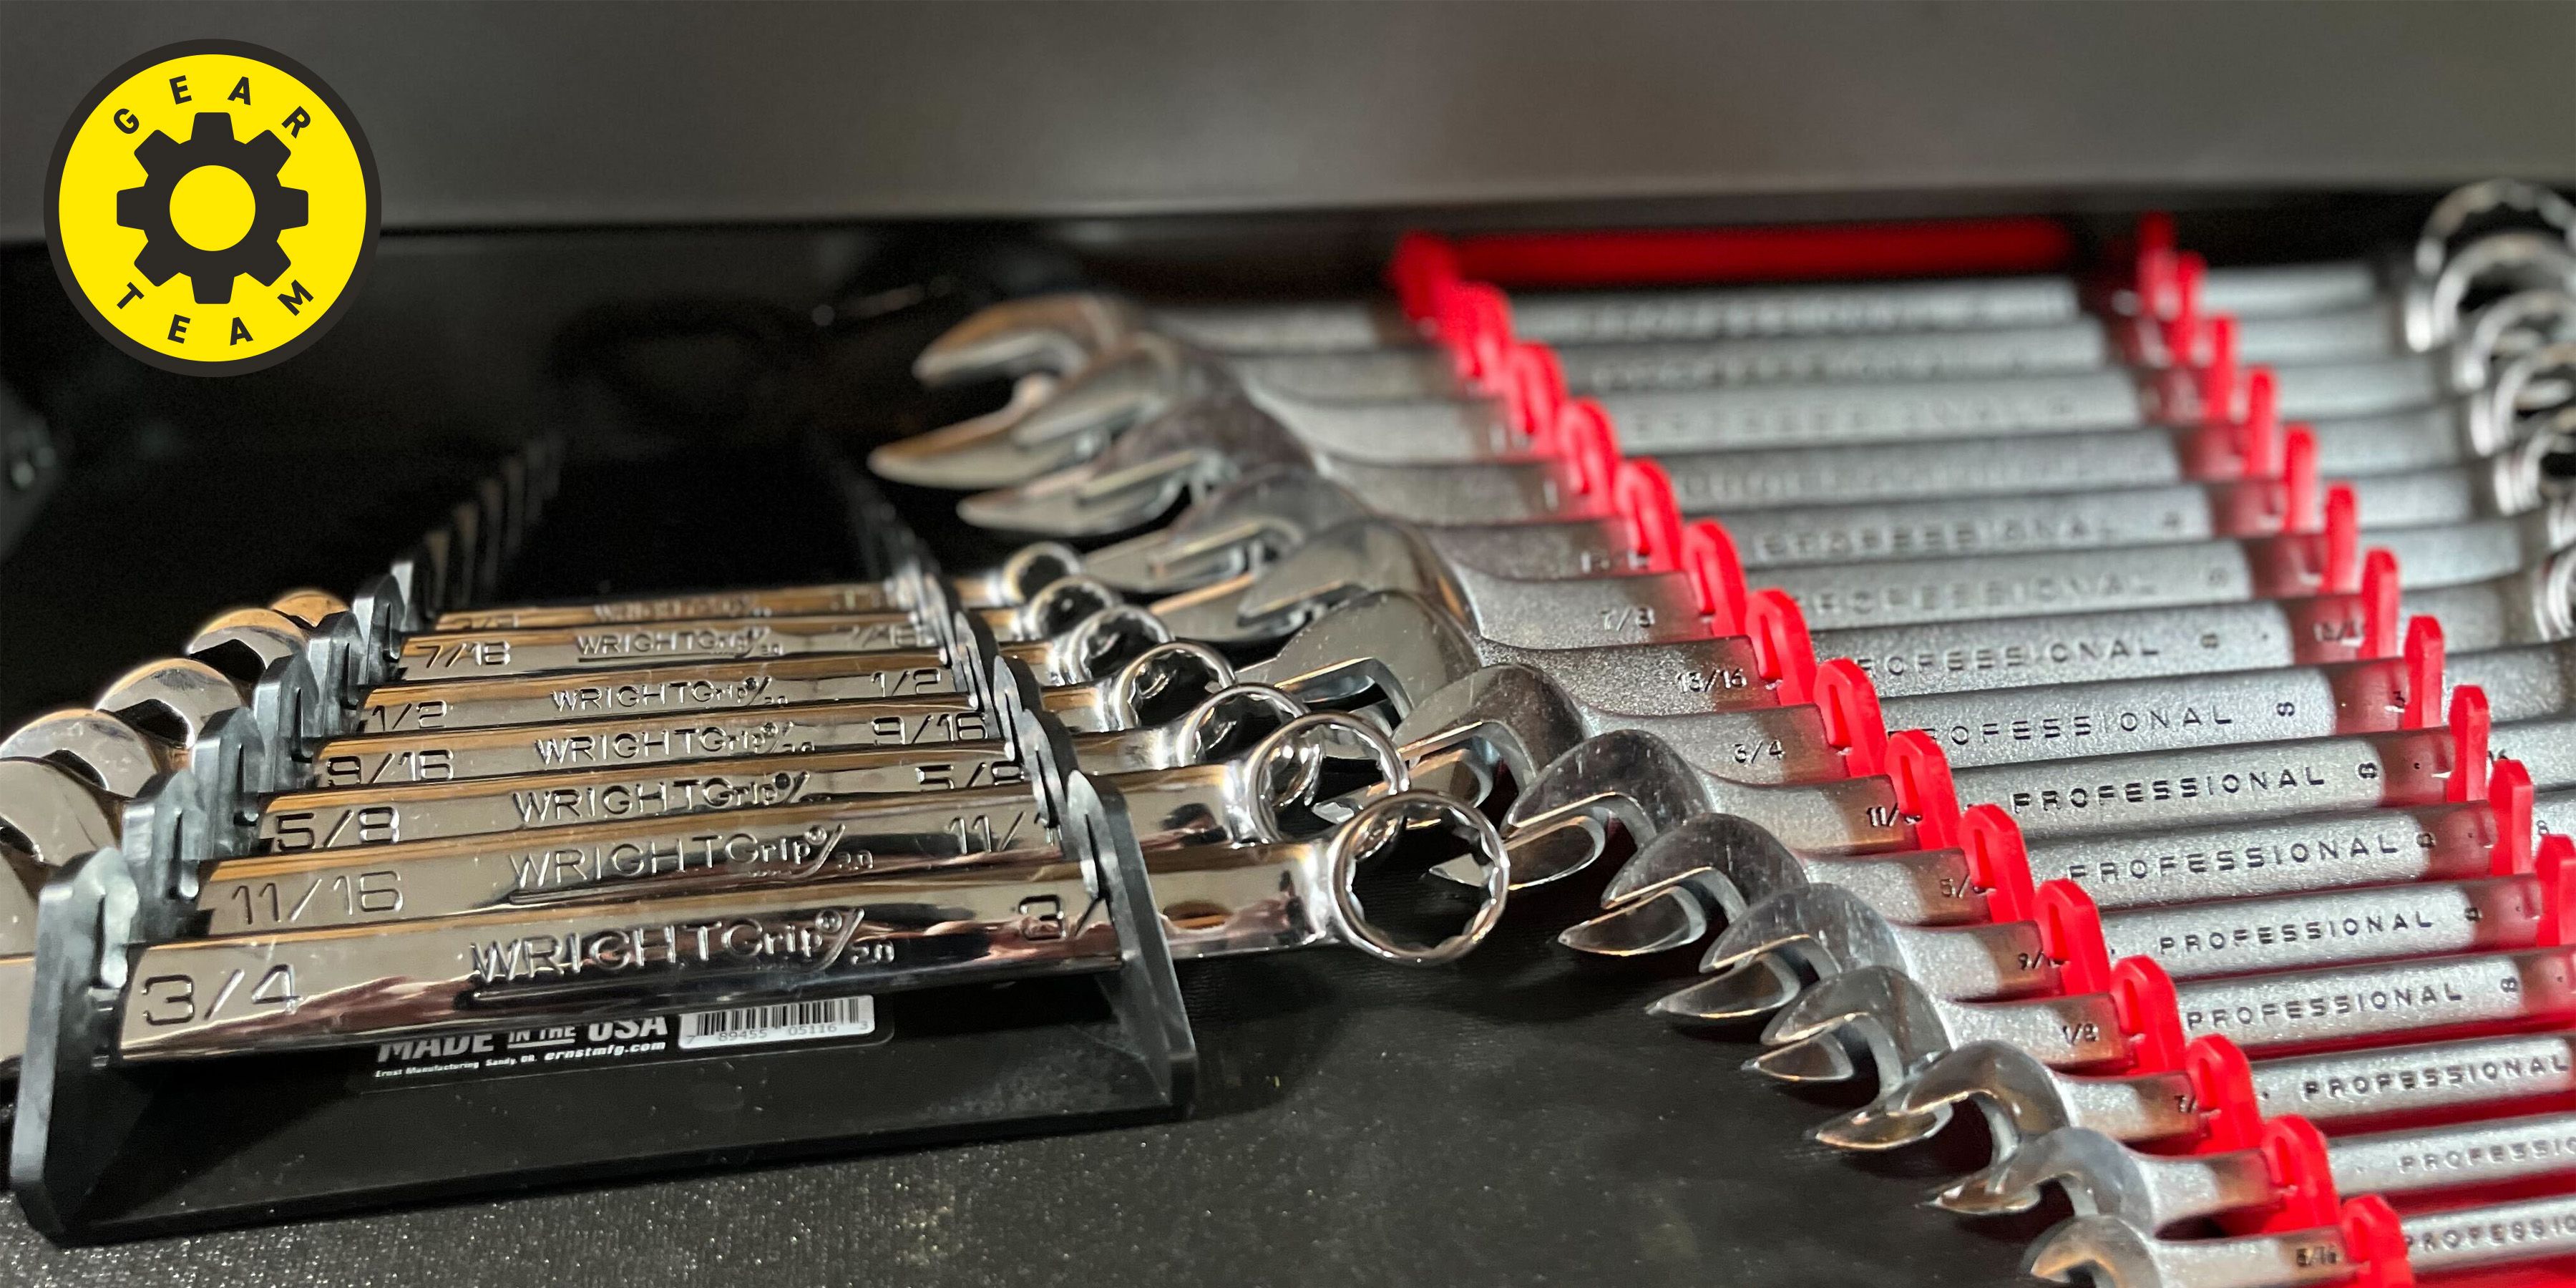 Why Professional Modelers Need this Tool Kit - Xuron® Tool Box